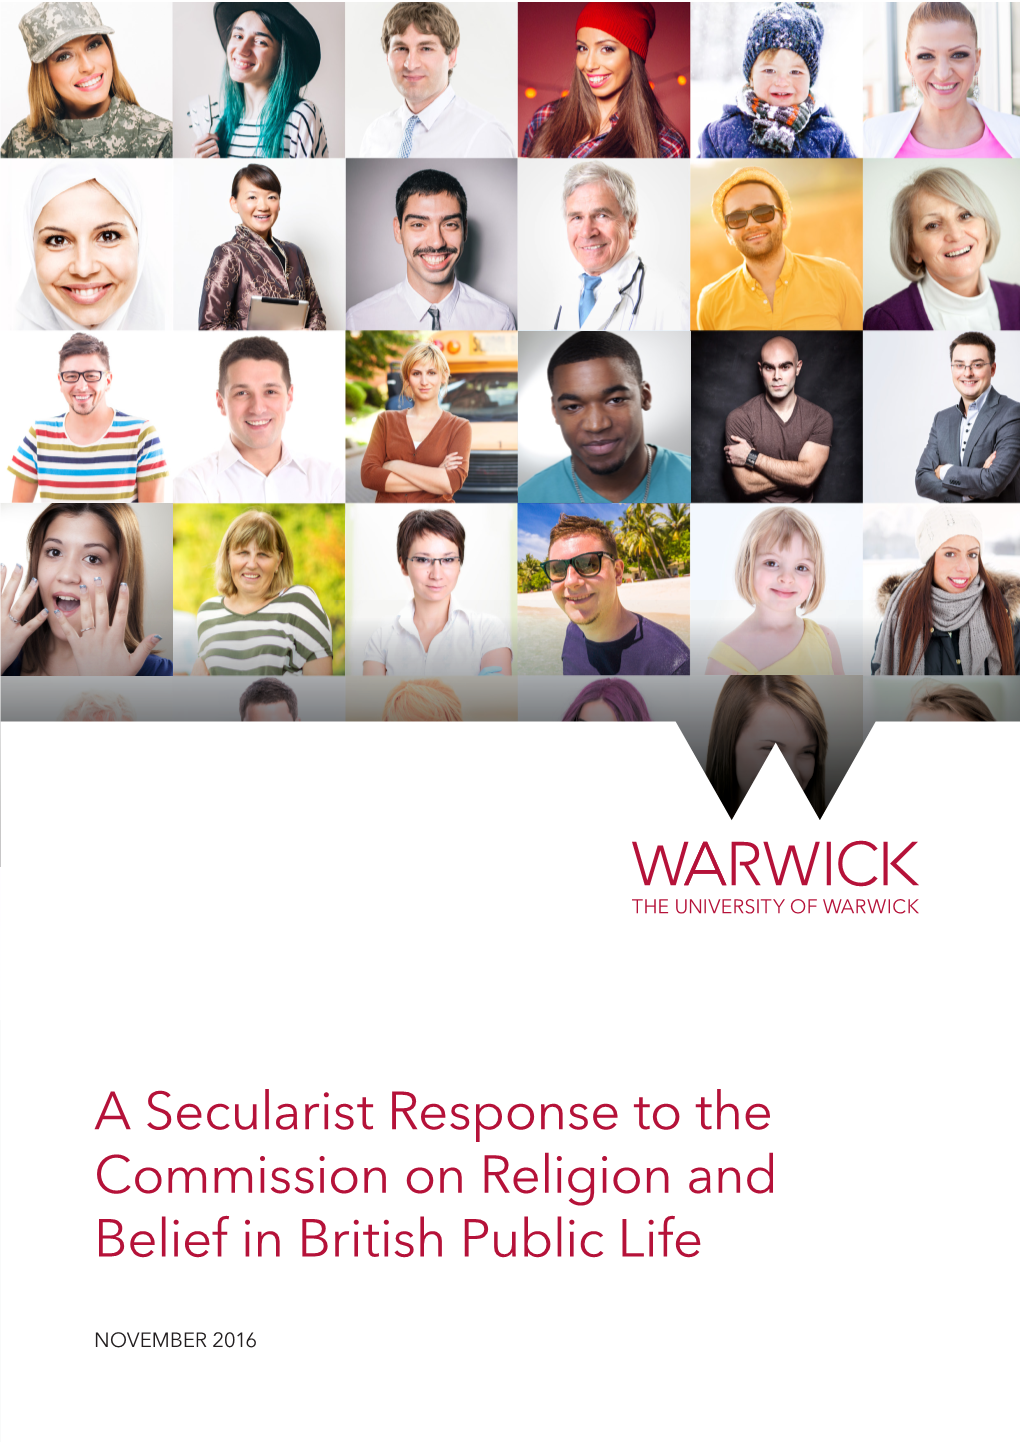 A Secularist Response to the Commission on Religion and Belief in British Public Life